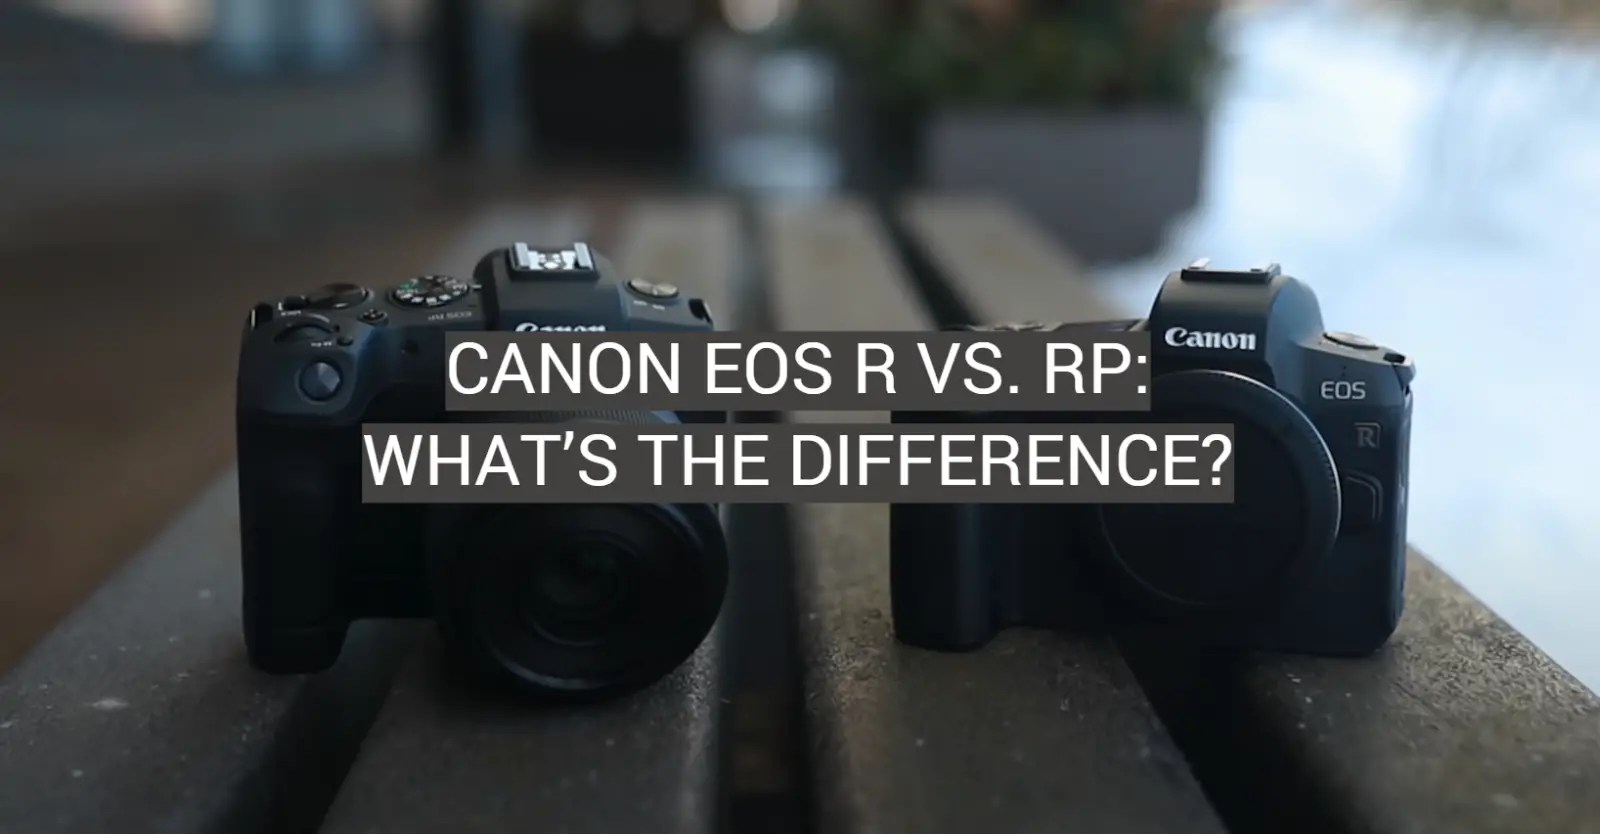 Canon EOS R vs. RP: What’s the Difference?